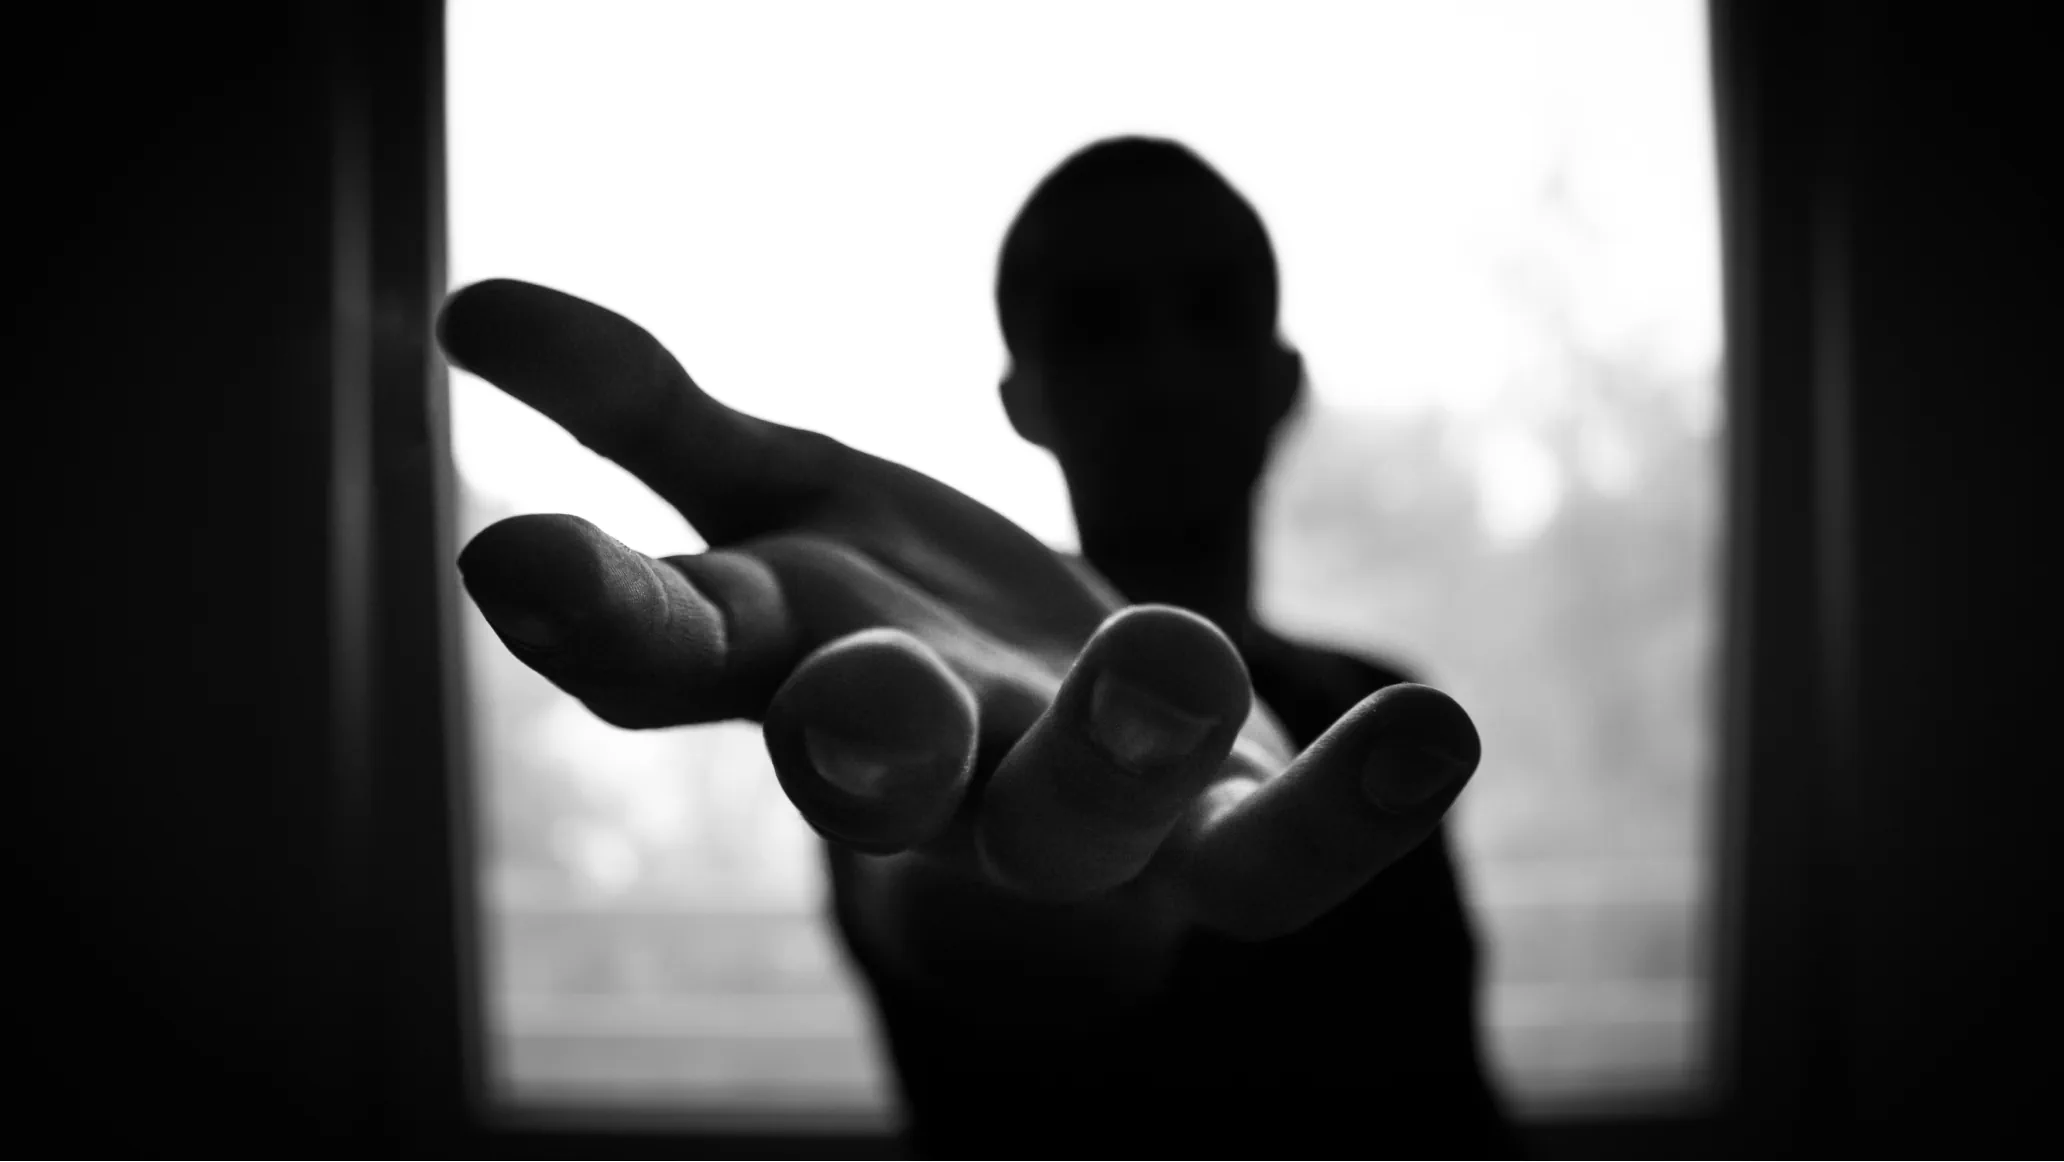 Black and white photo of unrecognizable person reaching out their hand to the camera.